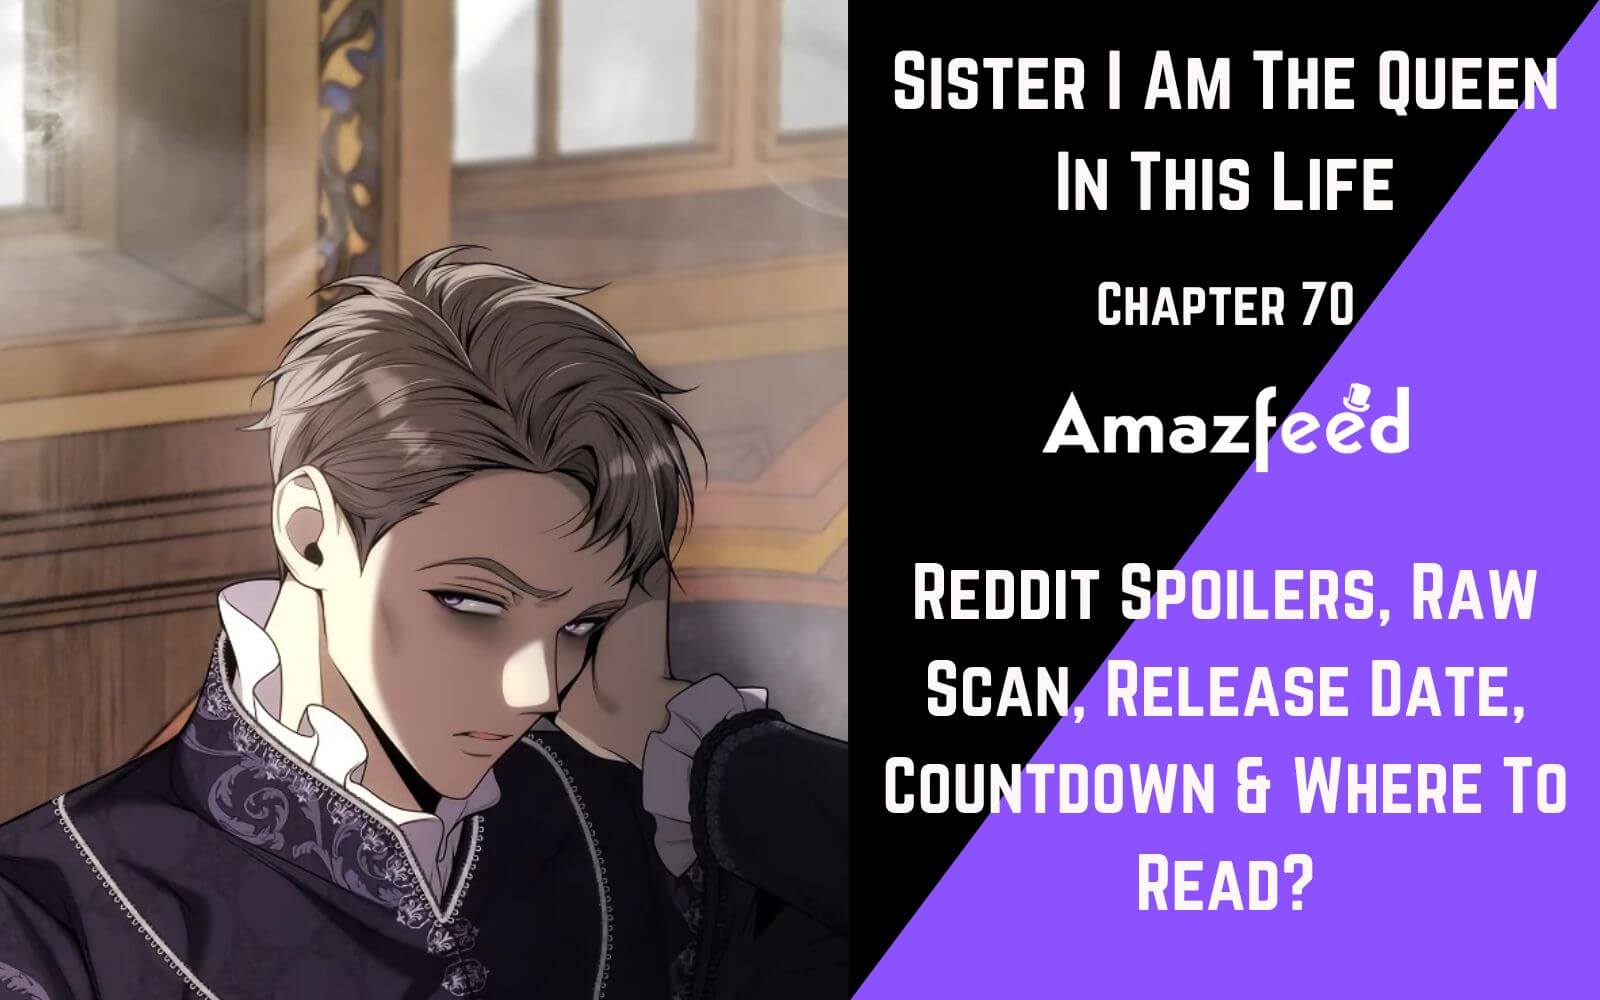 Skip And Loafer chapter 57 raw Archives » Amazfeed